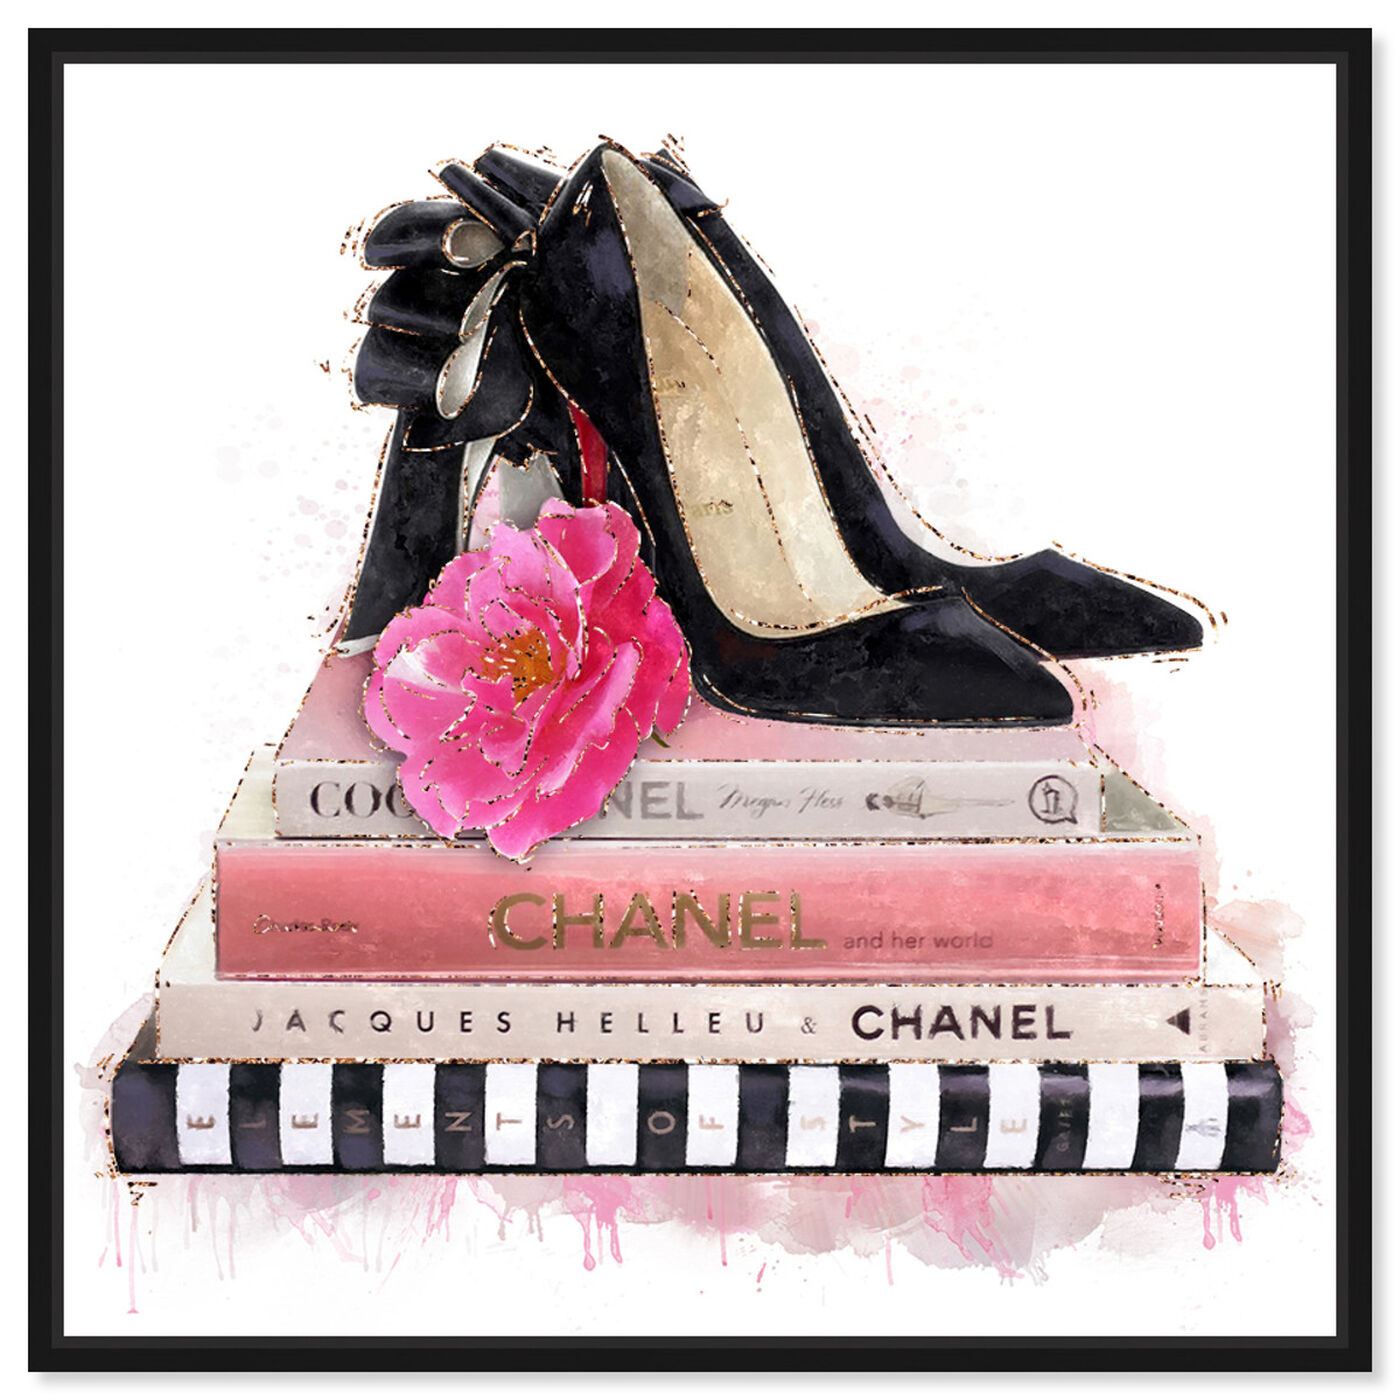 Fashion Books and Glam Shoes